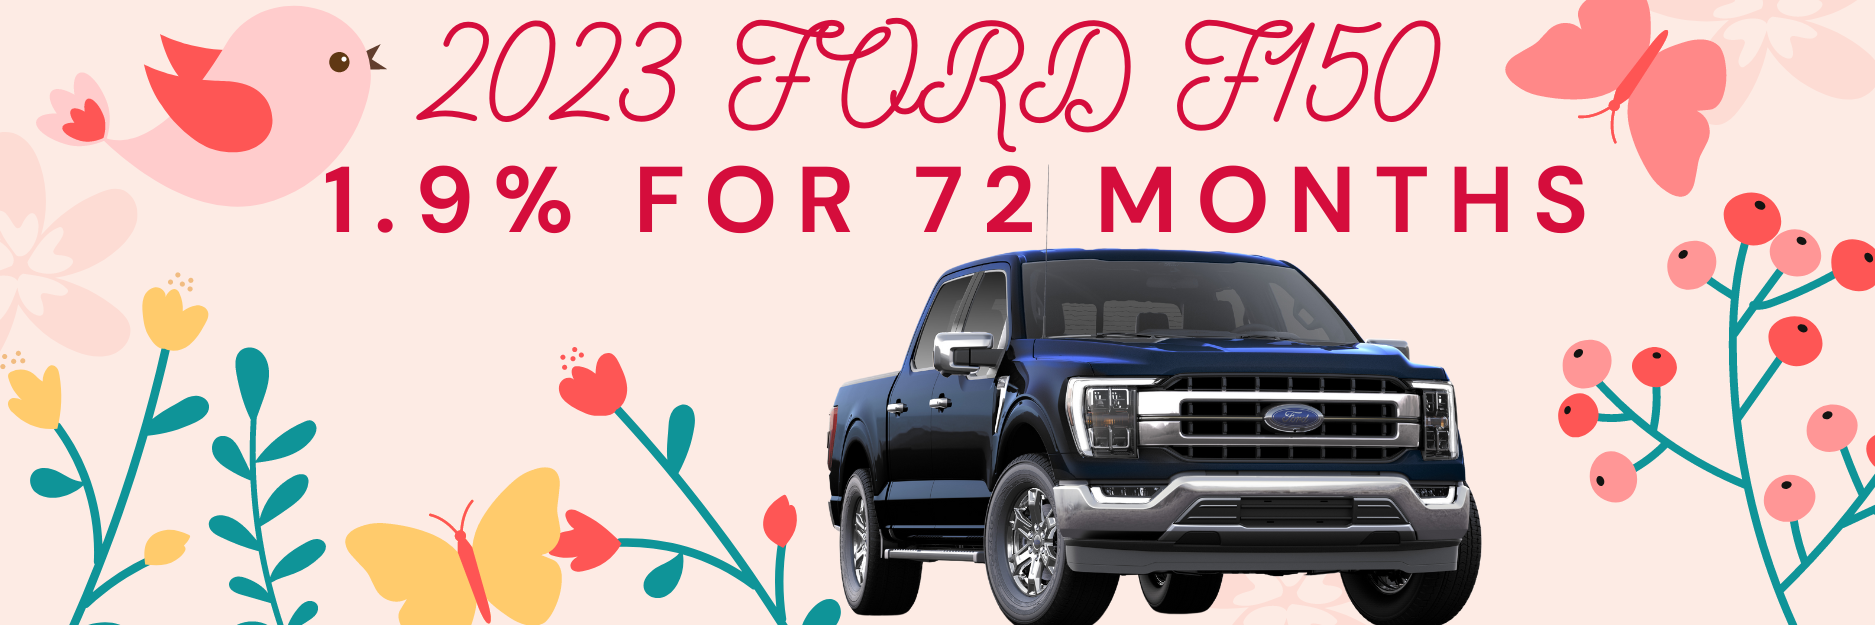 2023 Ford F150 1.9% for 72 months